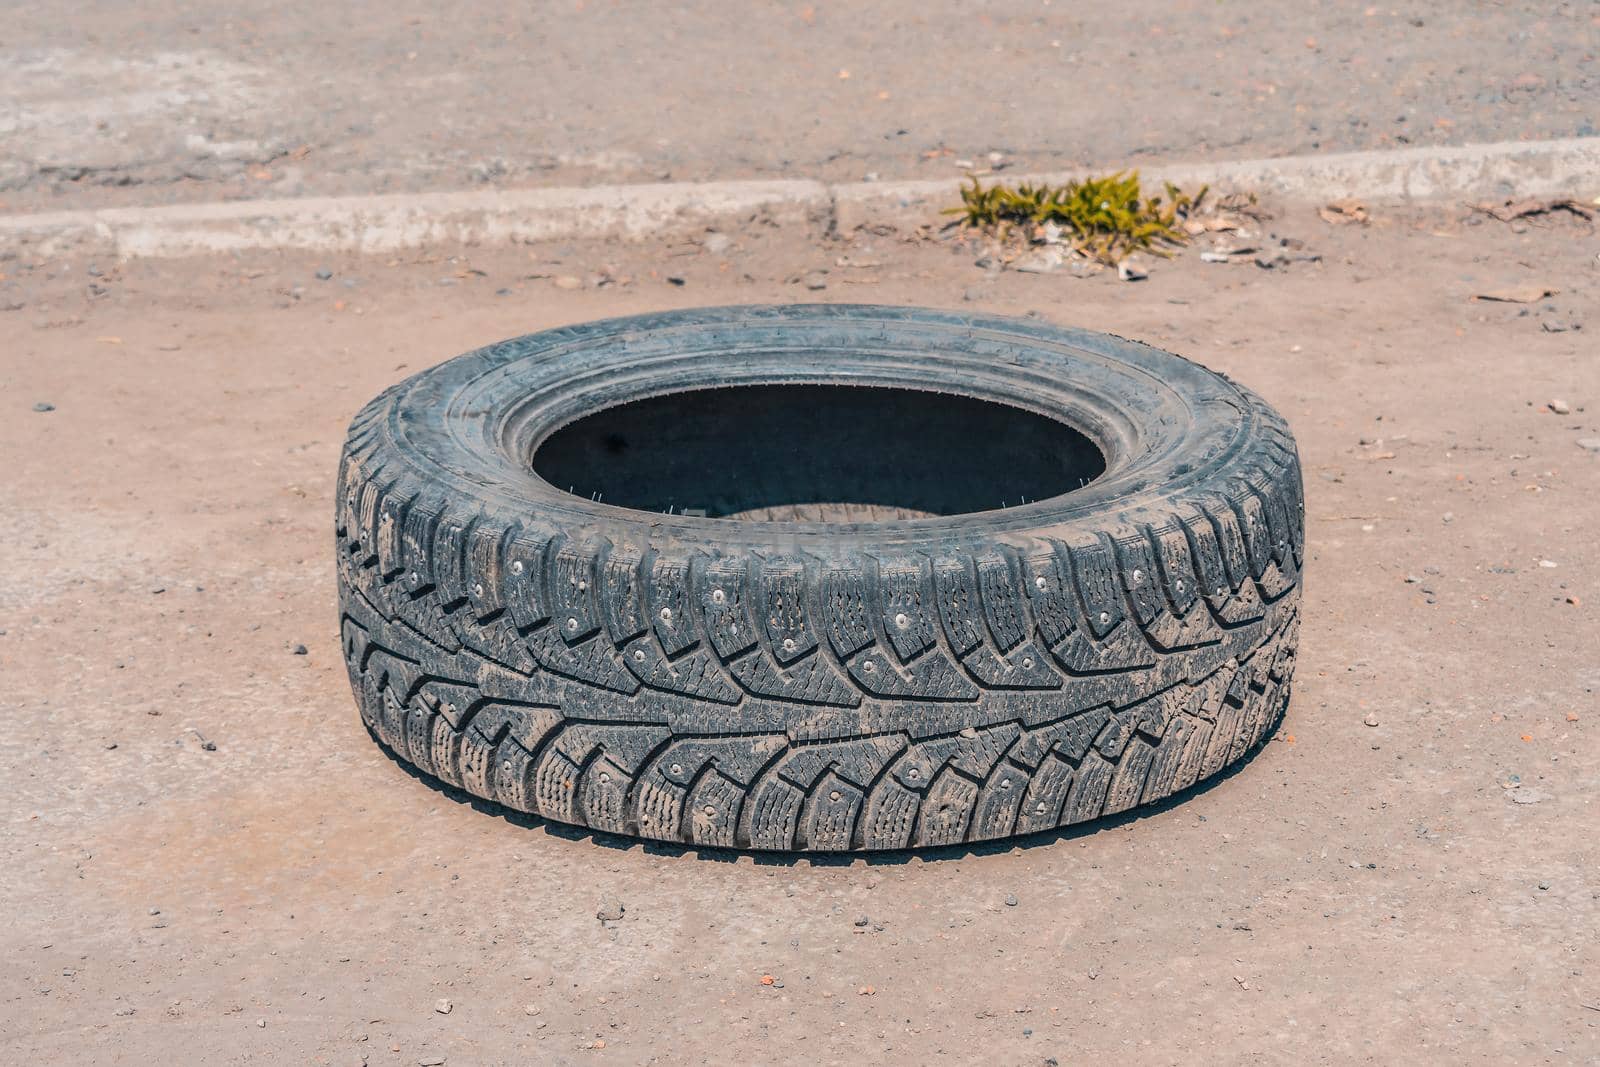 Thrown out on a deserted road, an old, worn-out winter tire from a car wheel